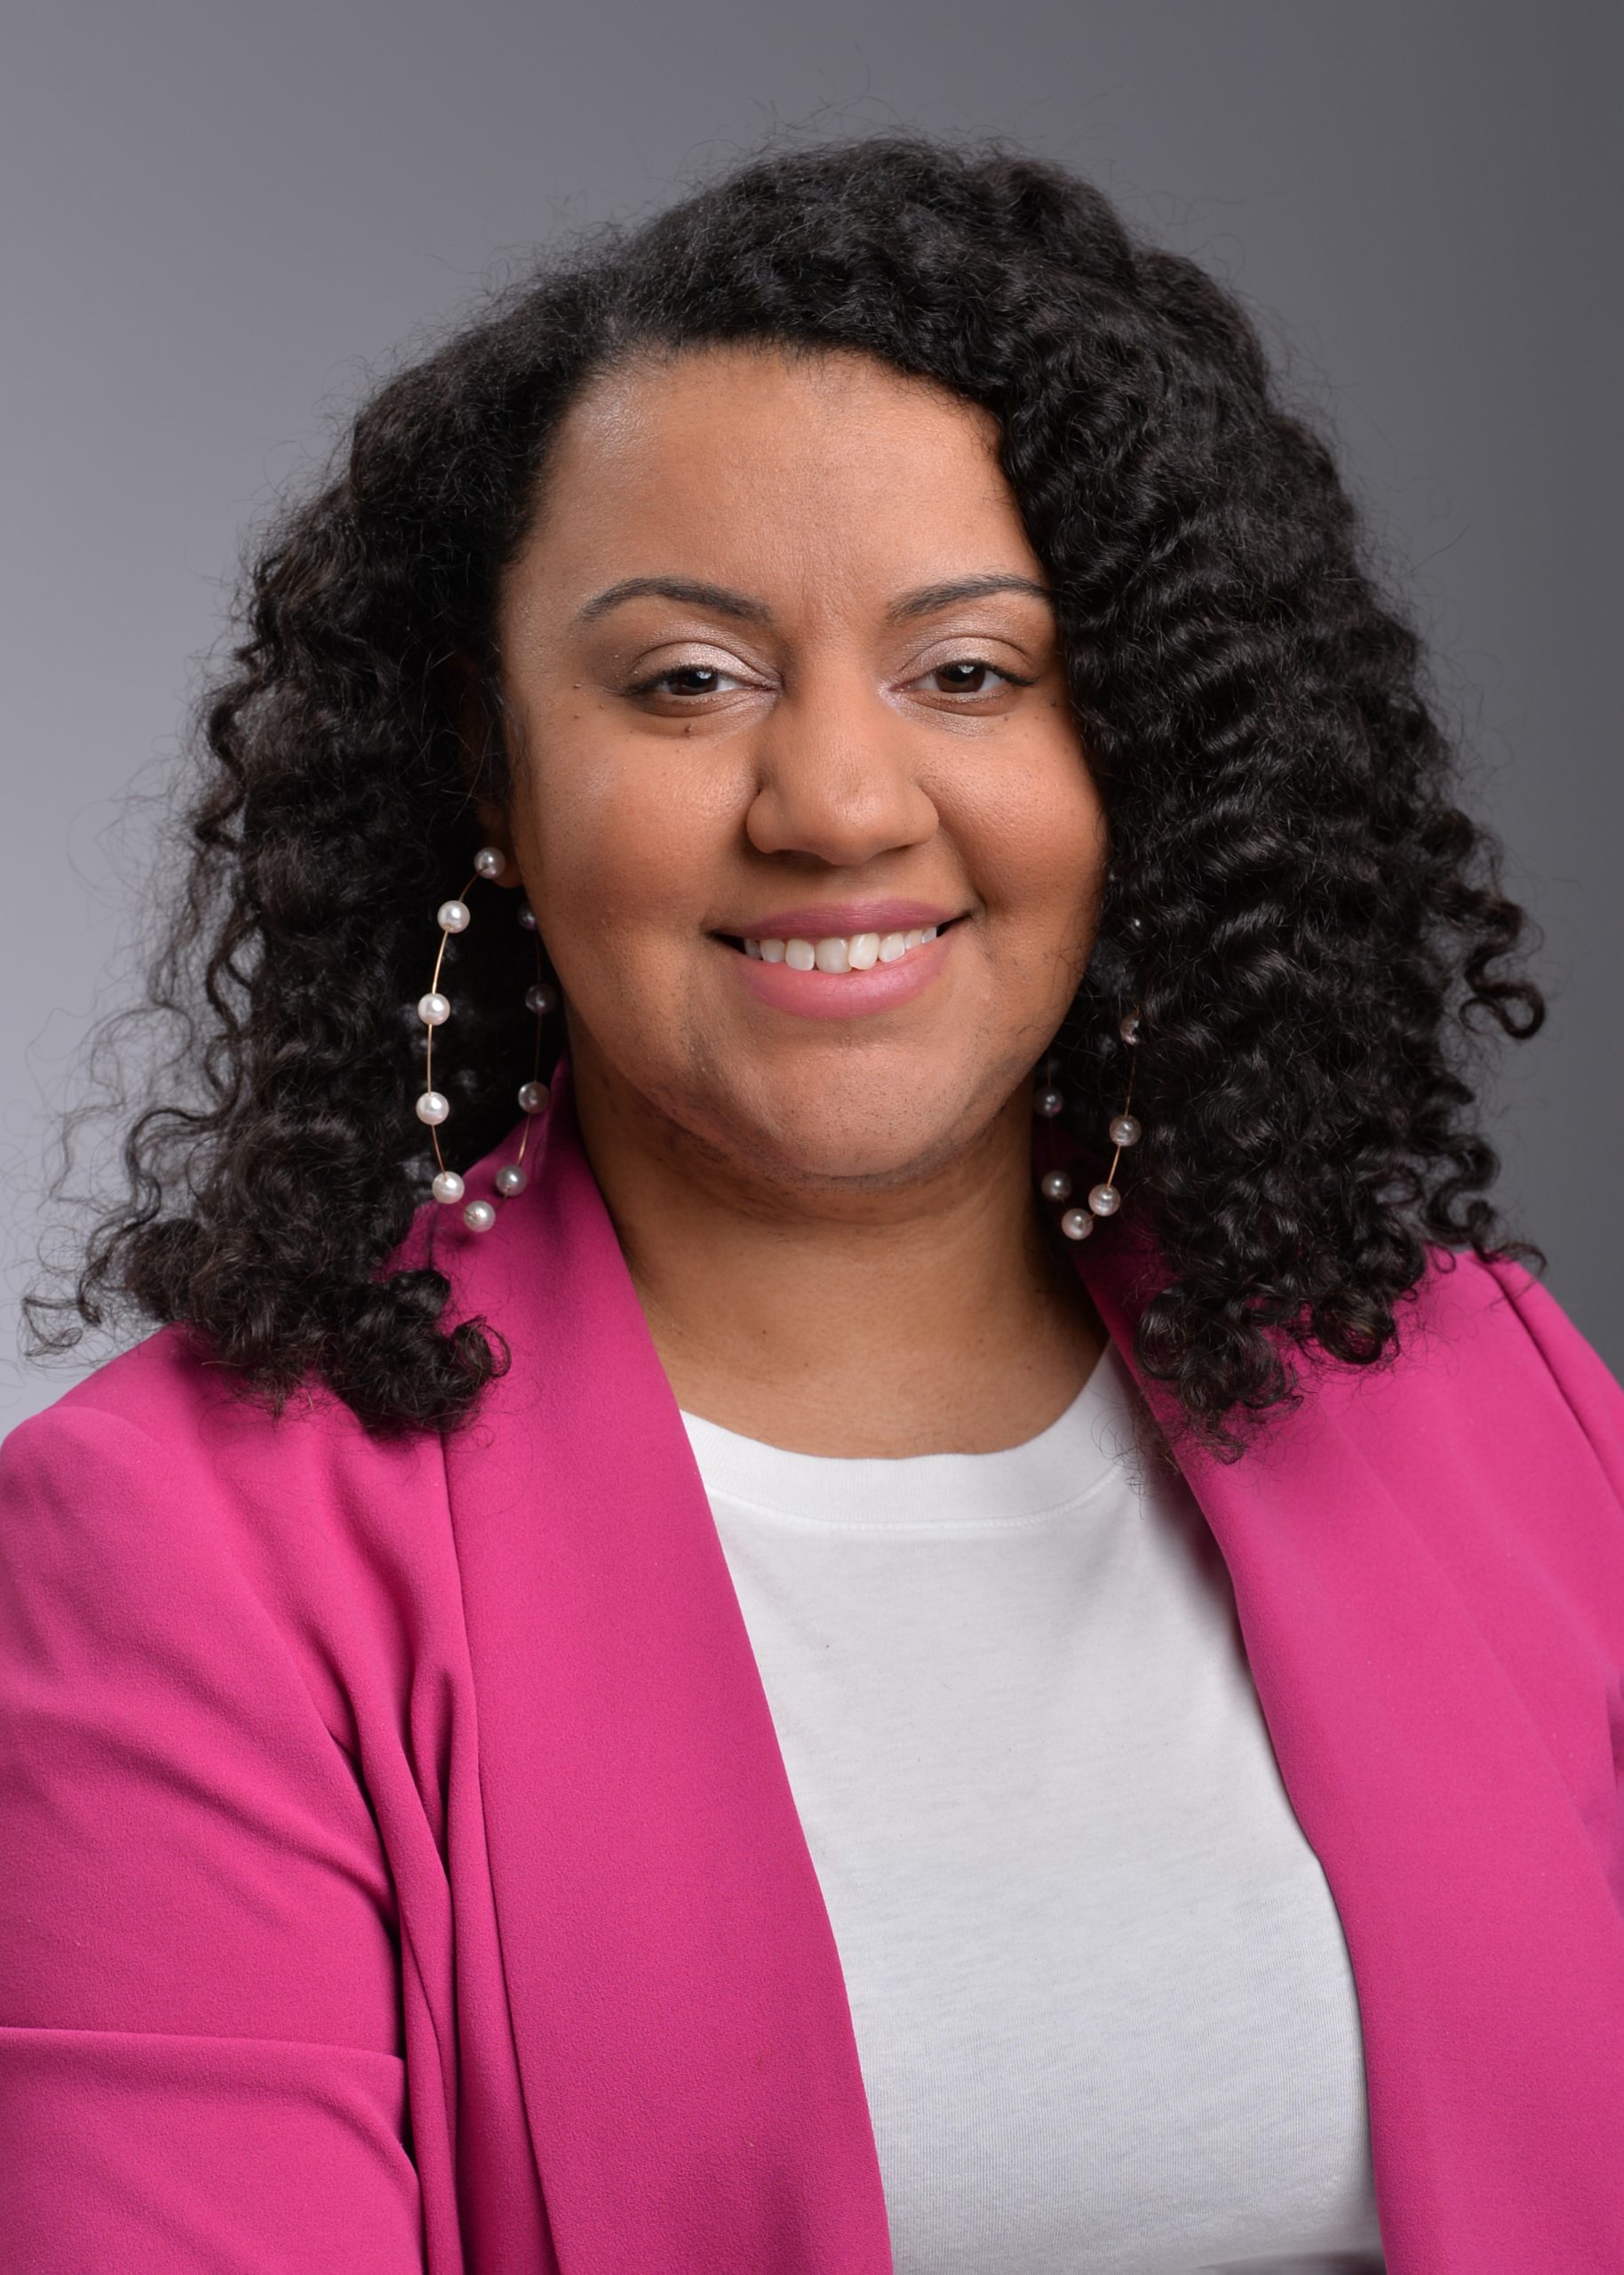 Black woman with shoulder length curly hair and a bright pink jacket.